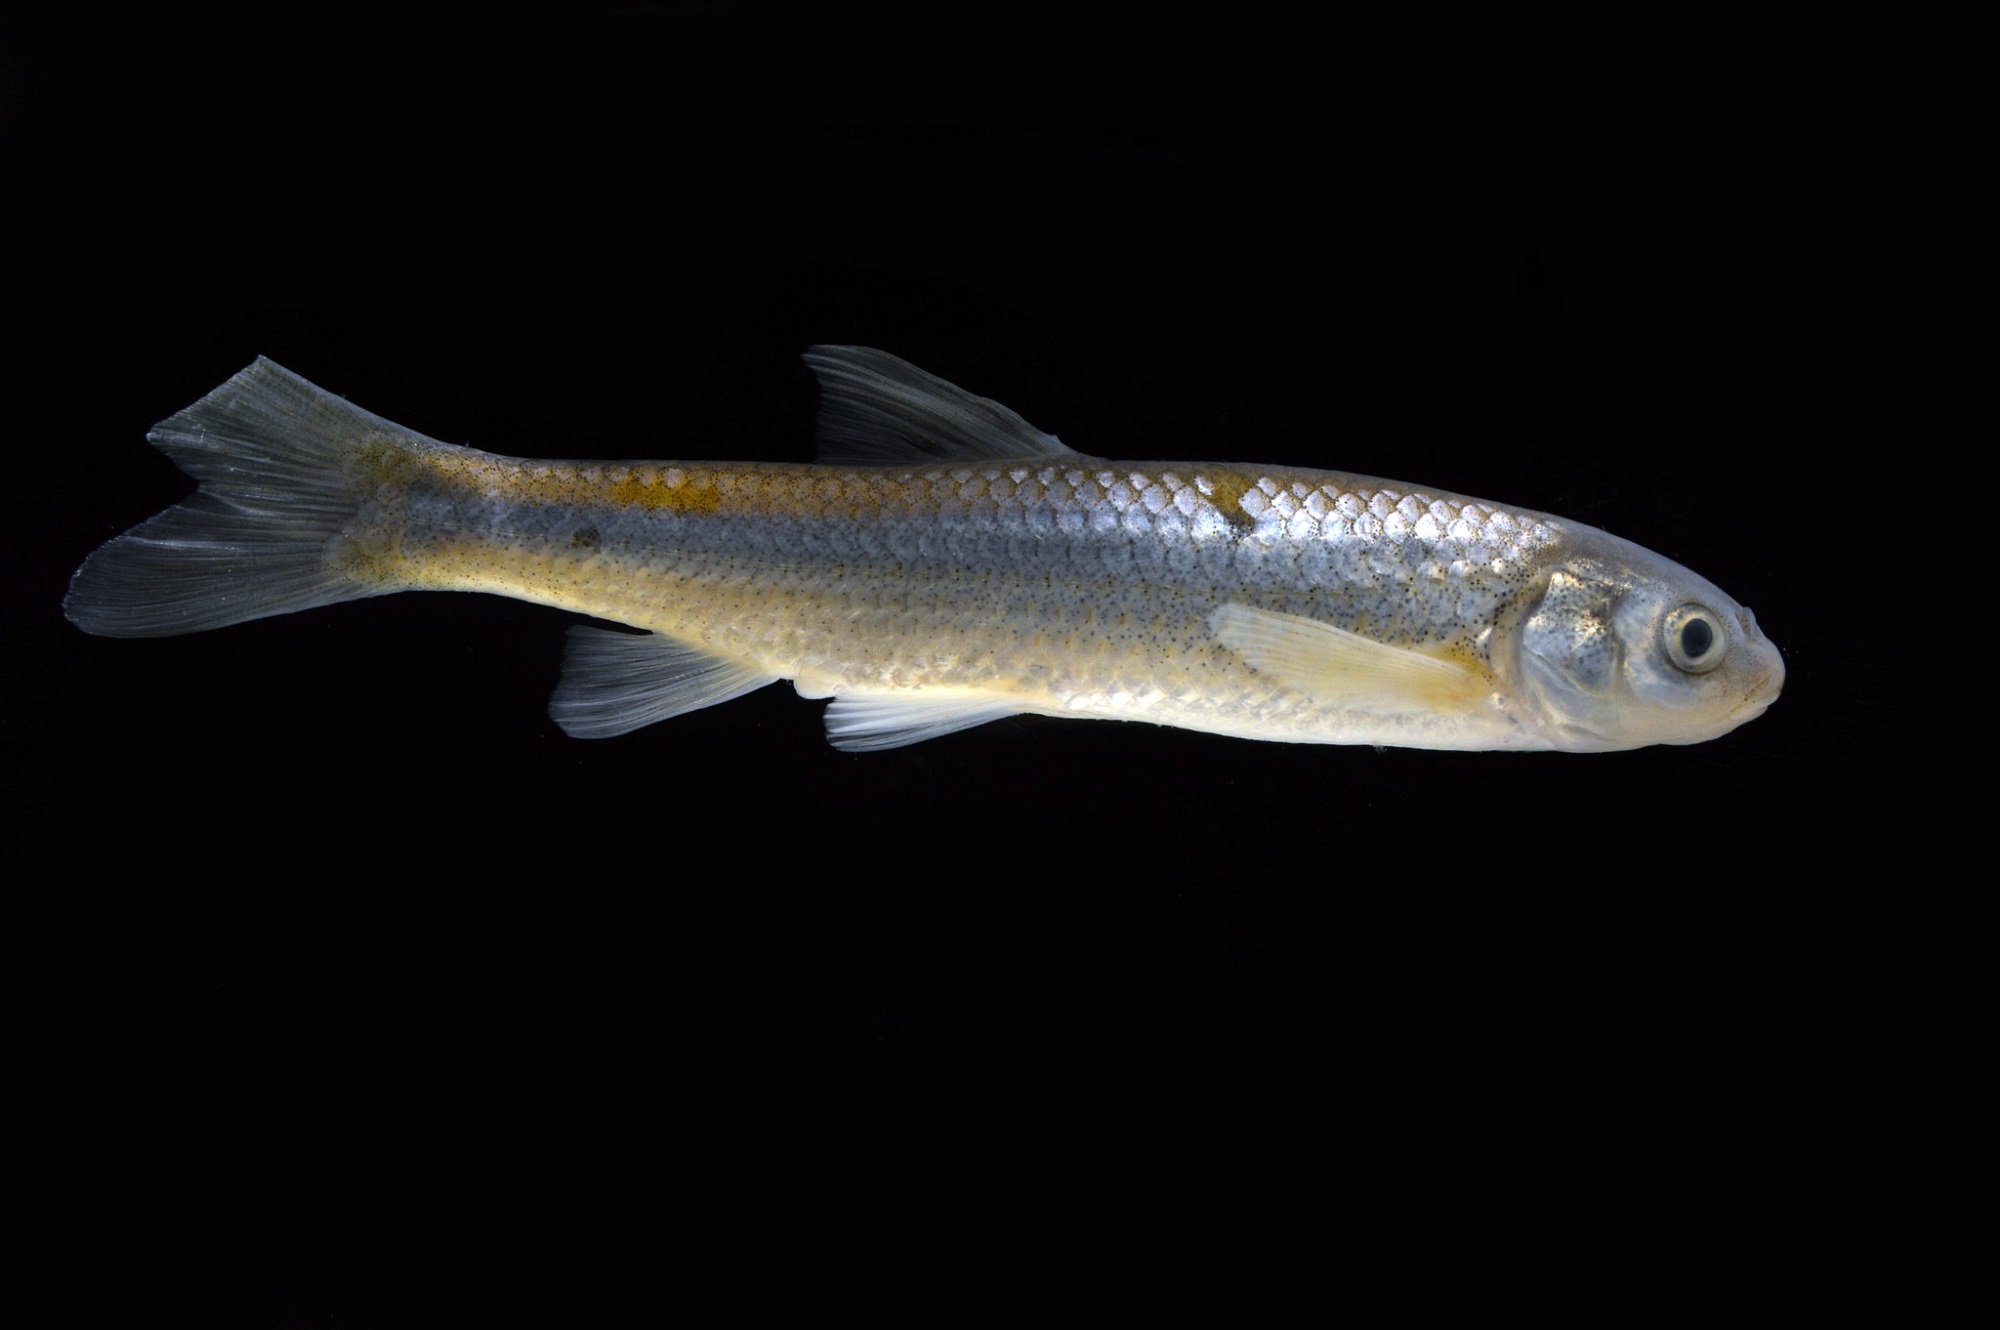 Group says Rio Grande silvery minnow population in decline